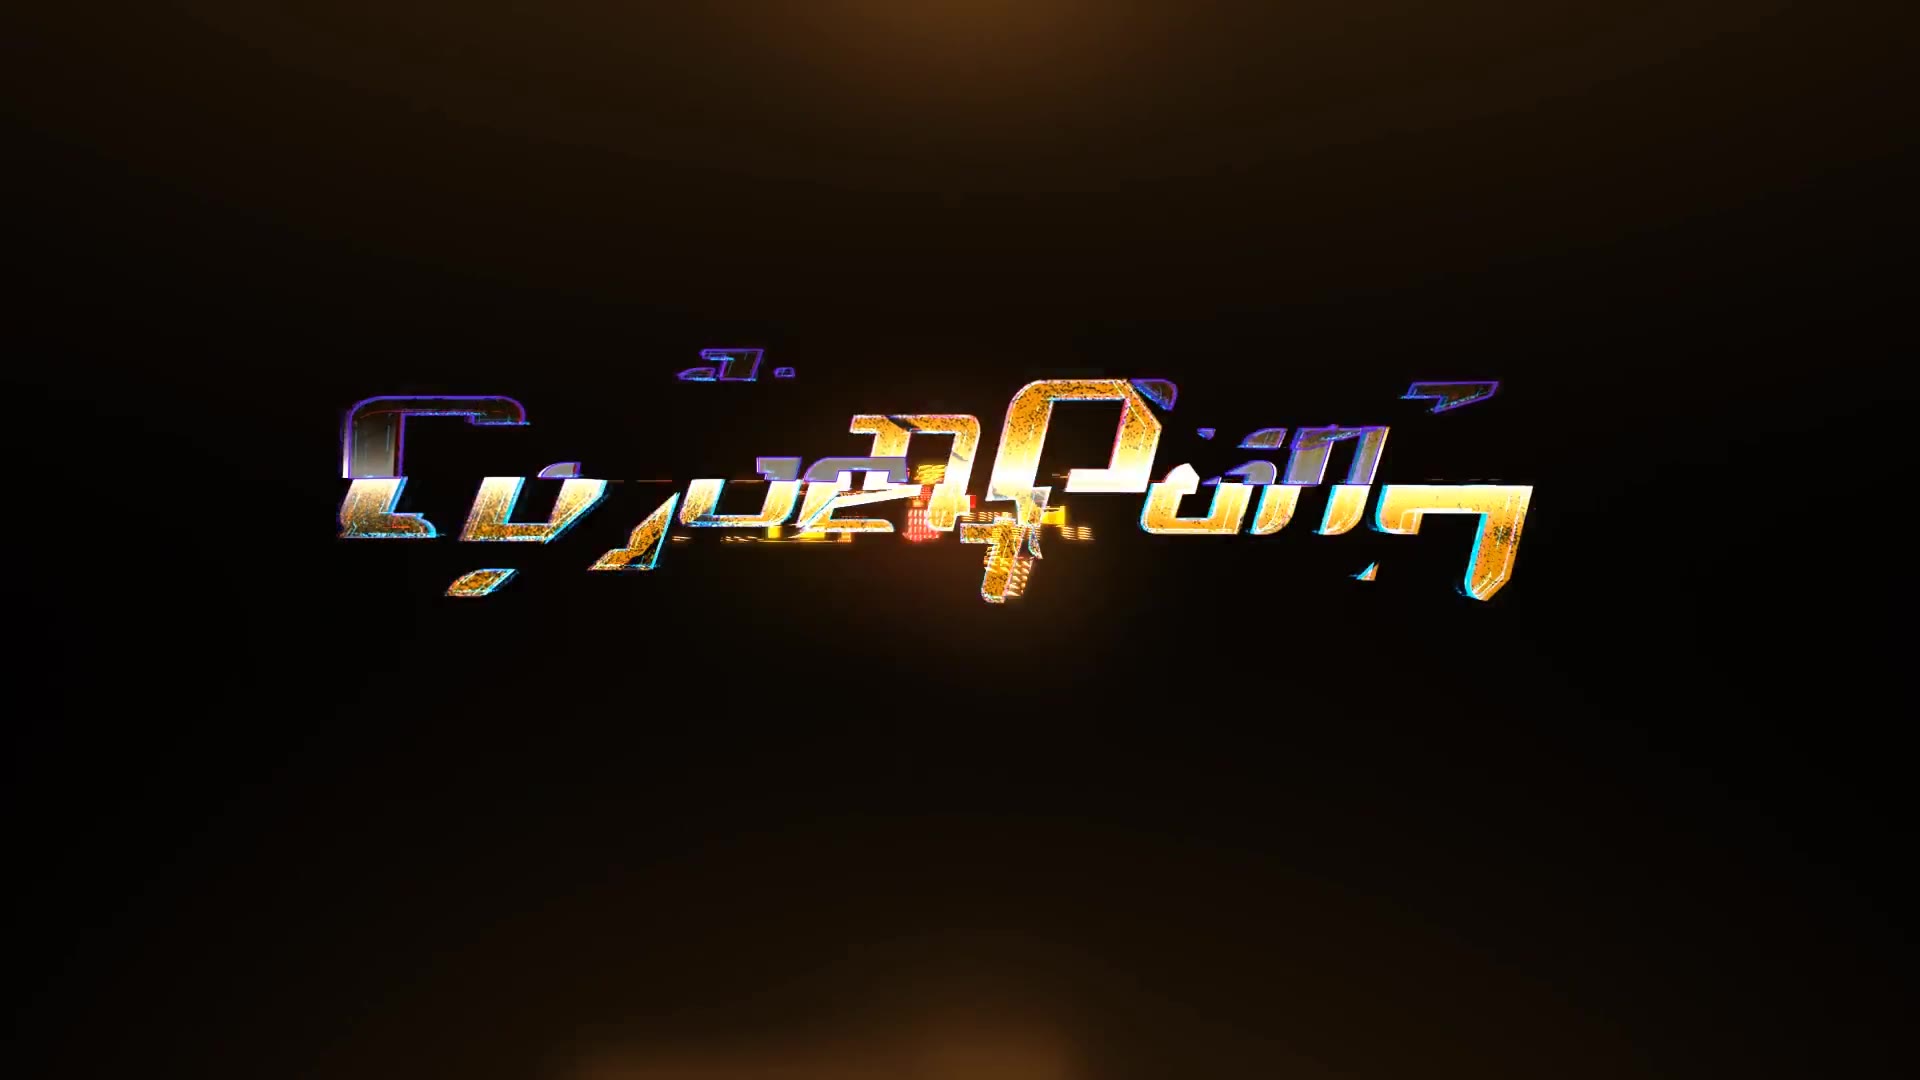 Cyberpunk Glitch Logo Rapid Download 22306862 Videohive After Effects